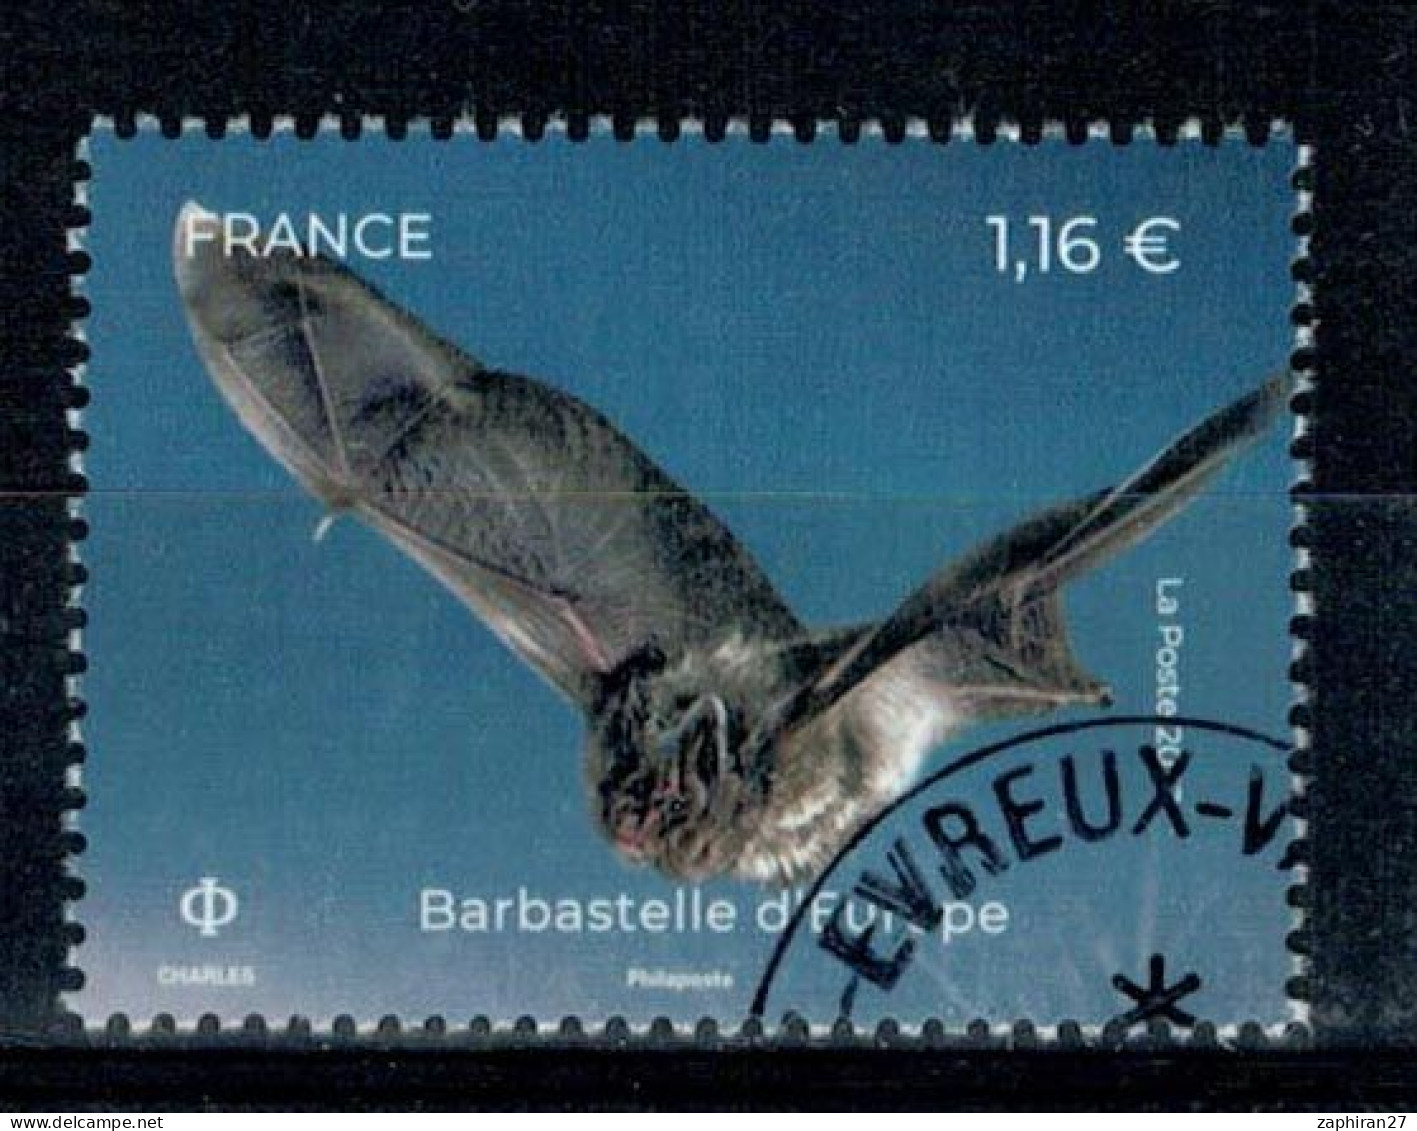 2023 BARBASTELLE CHAUVE SOURIS OBLITERE CACHET ROND #234# - Used Stamps